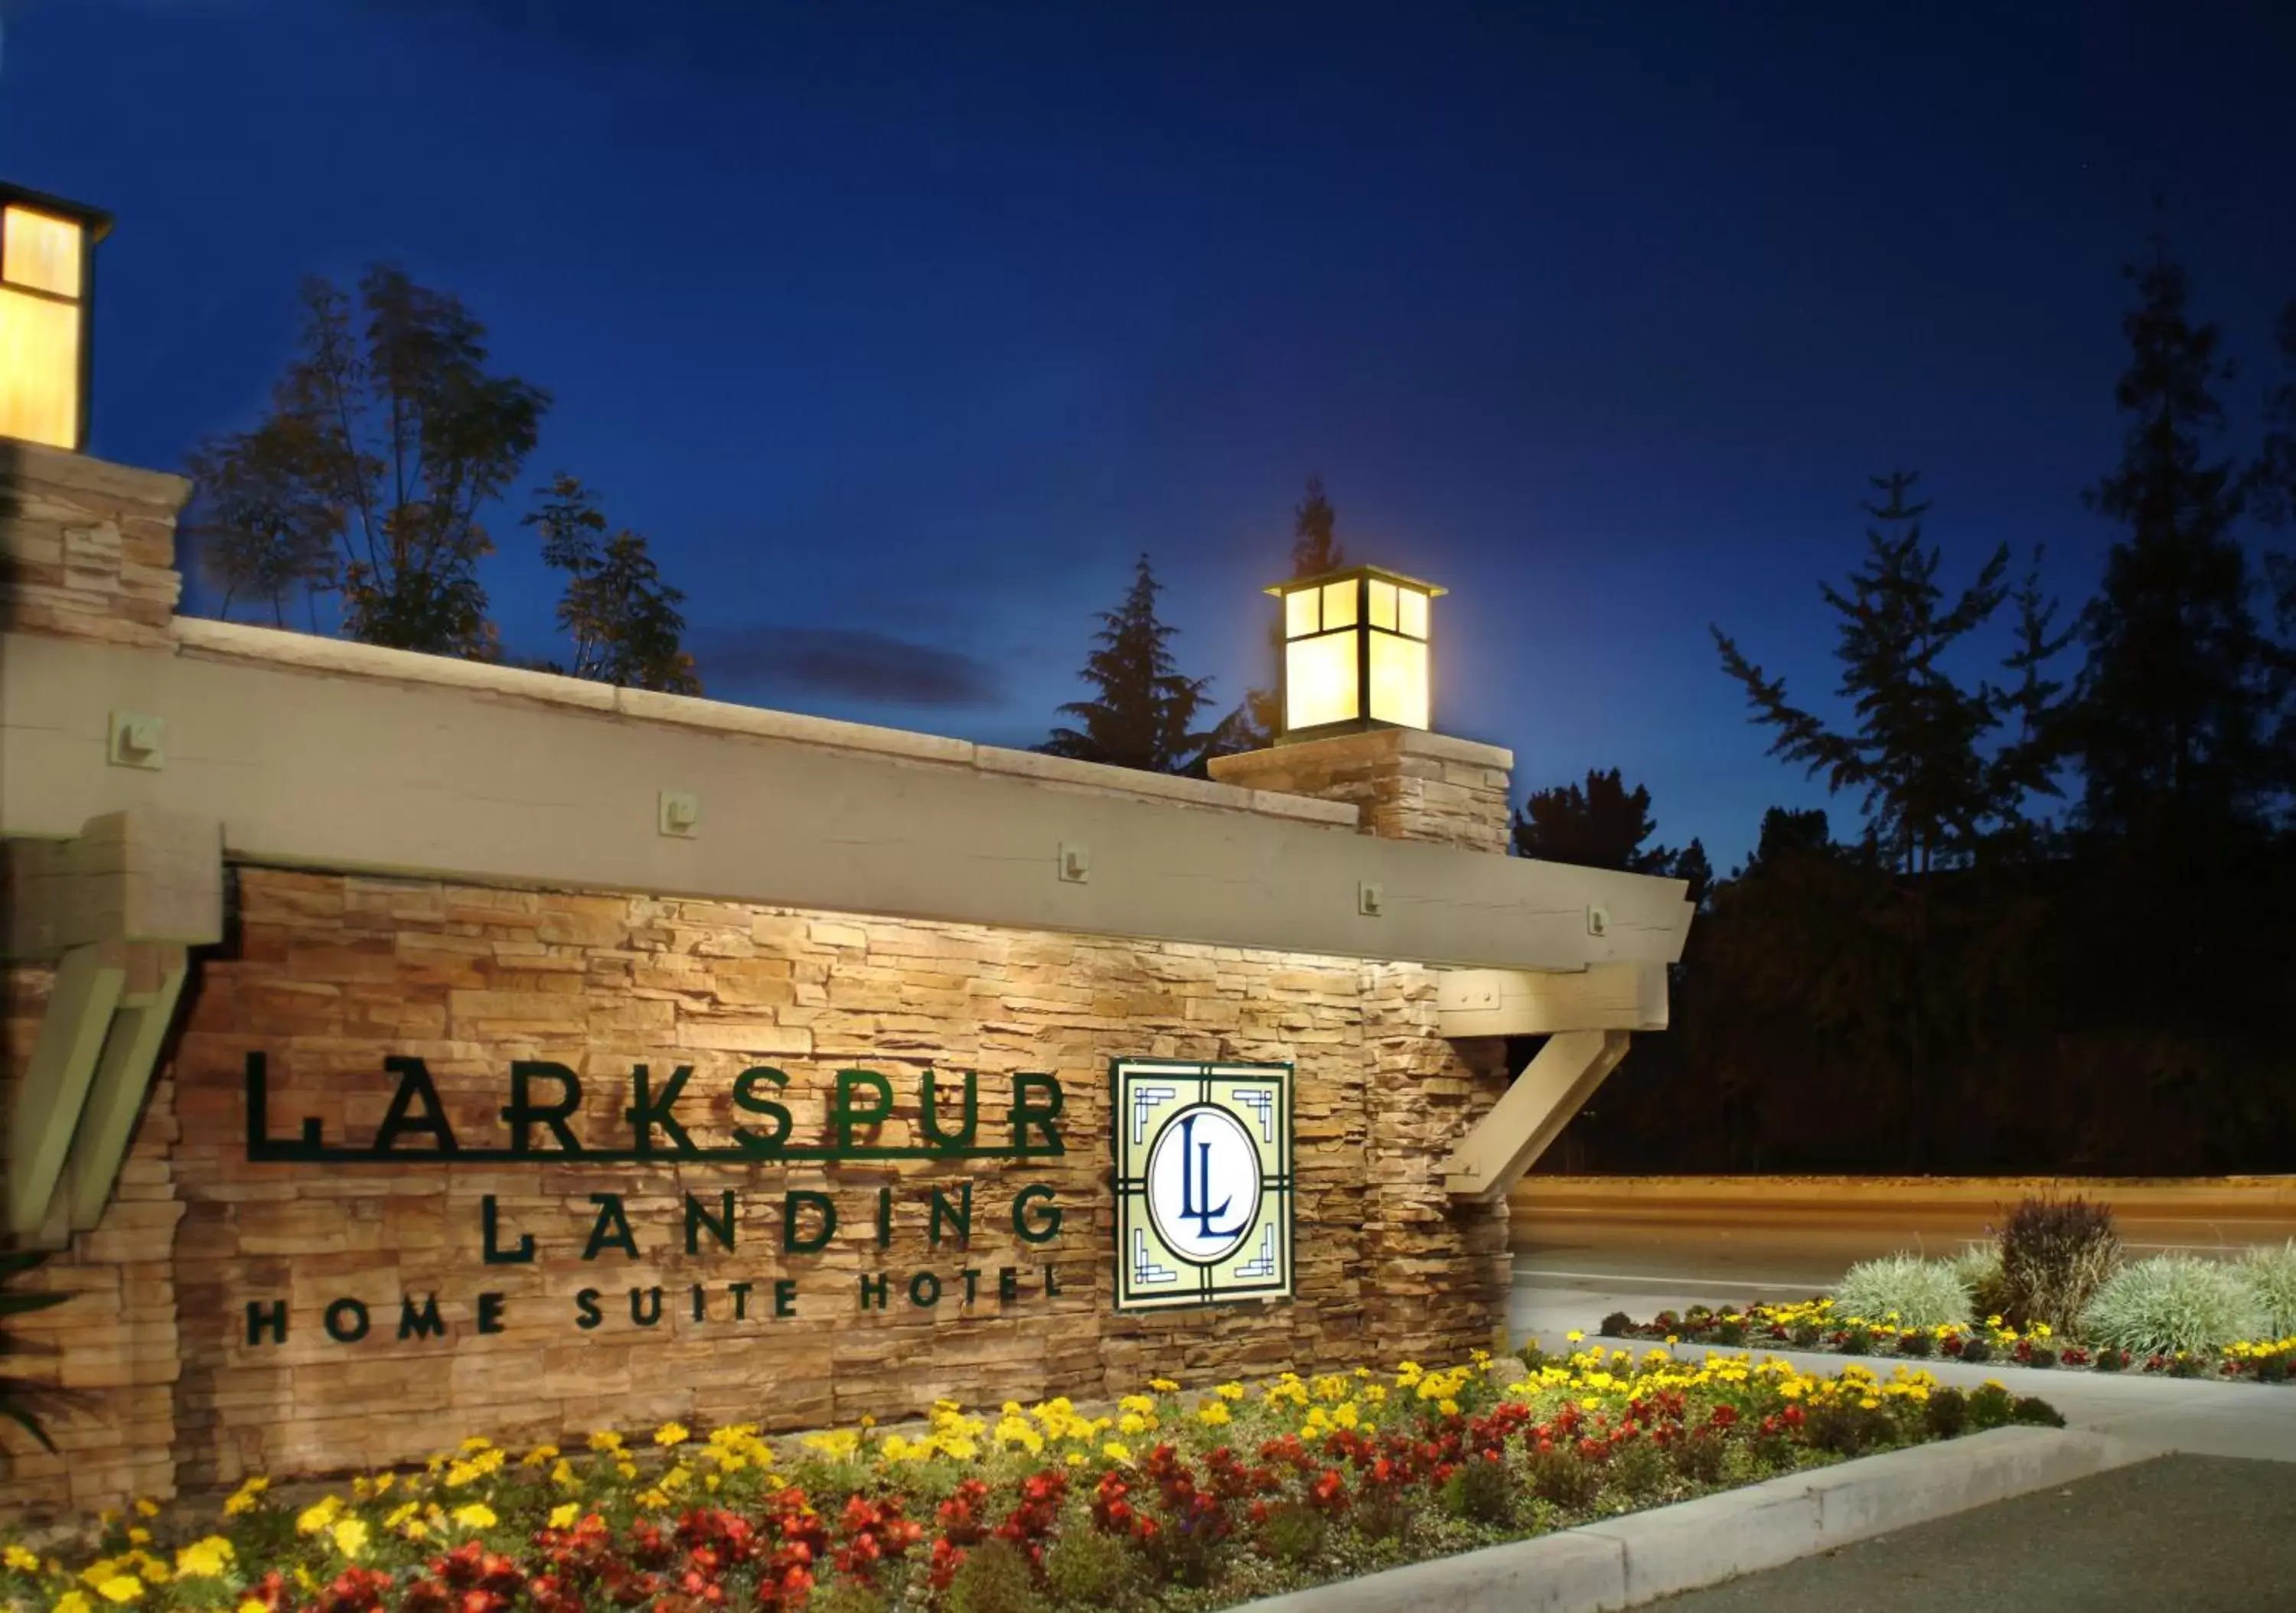 Property logo or sign in Larkspur Landing South San Francisco-An All-Suite Hotel